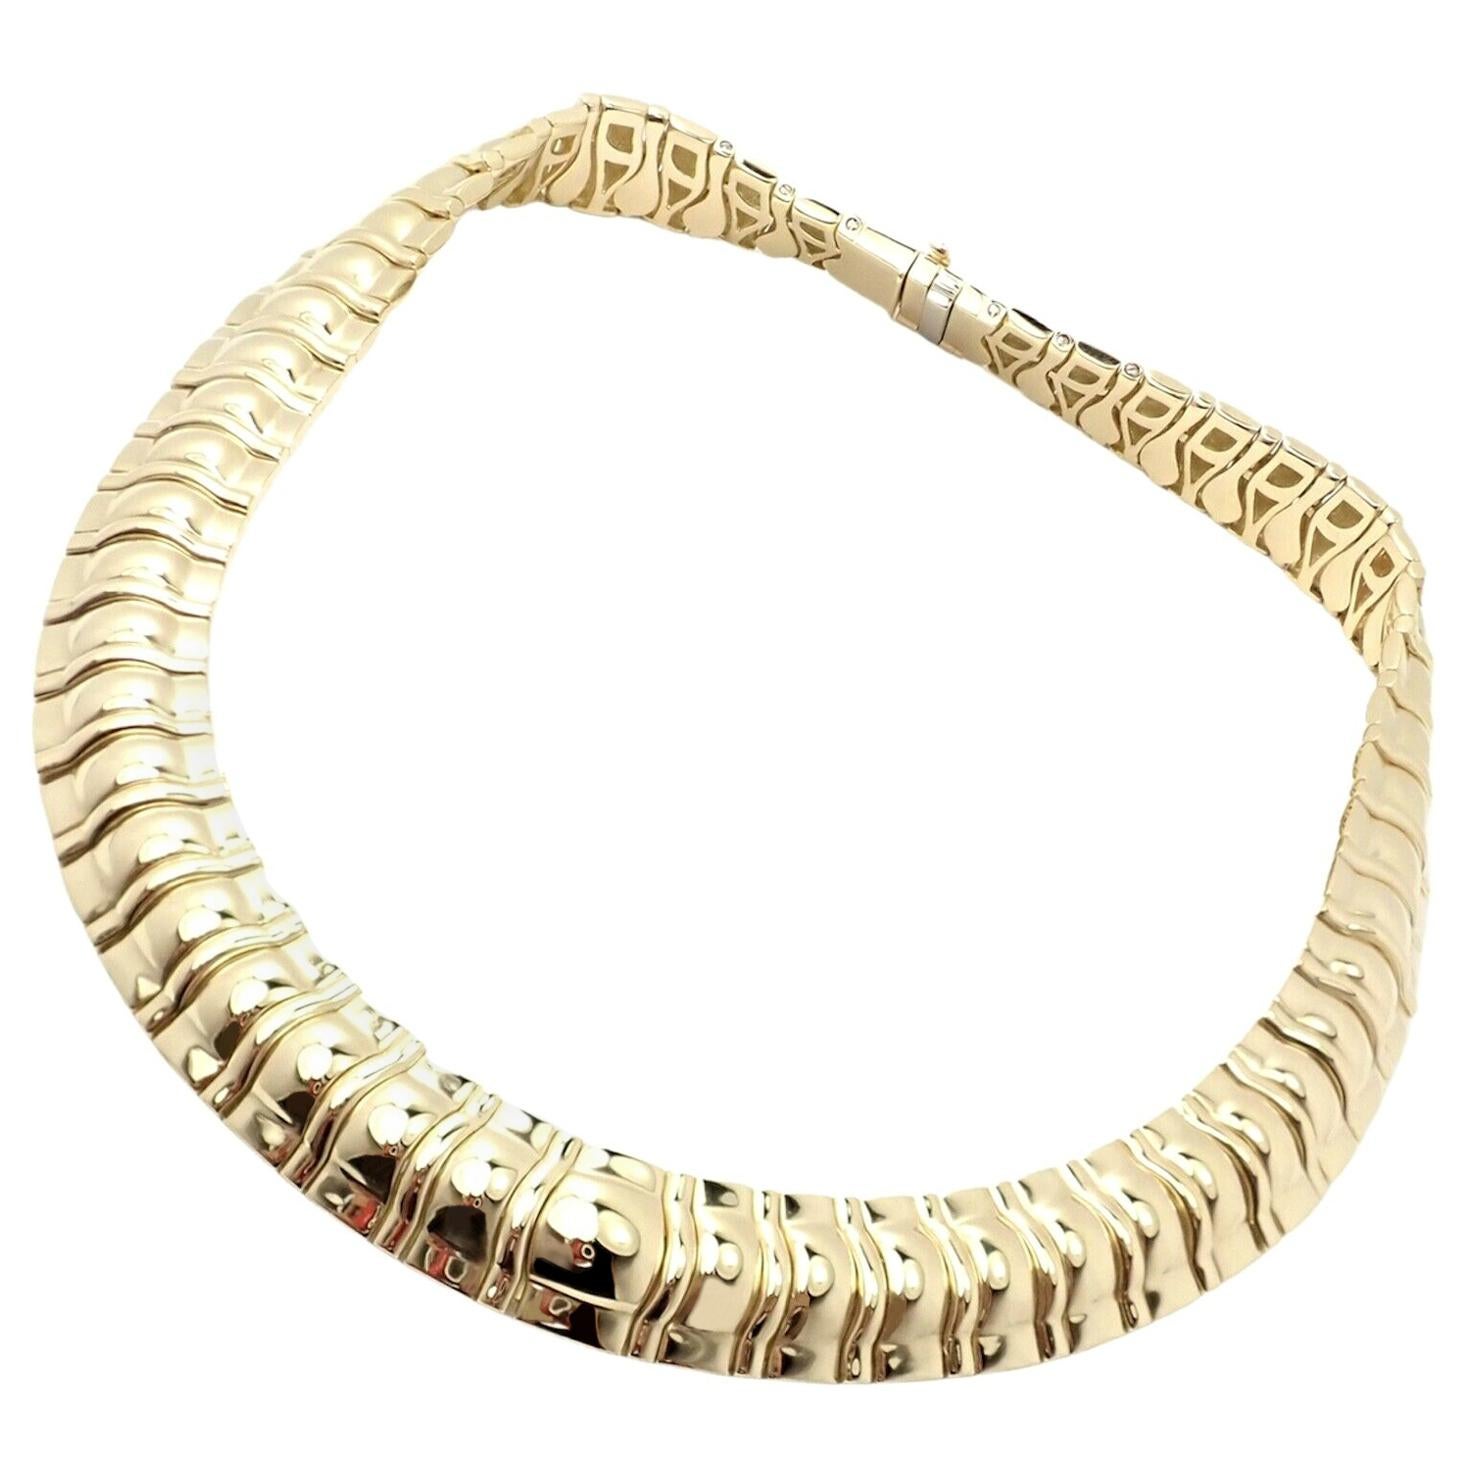 Piaget Classic Thick Limited Edition 1990 Yellow Gold Choker Necklace